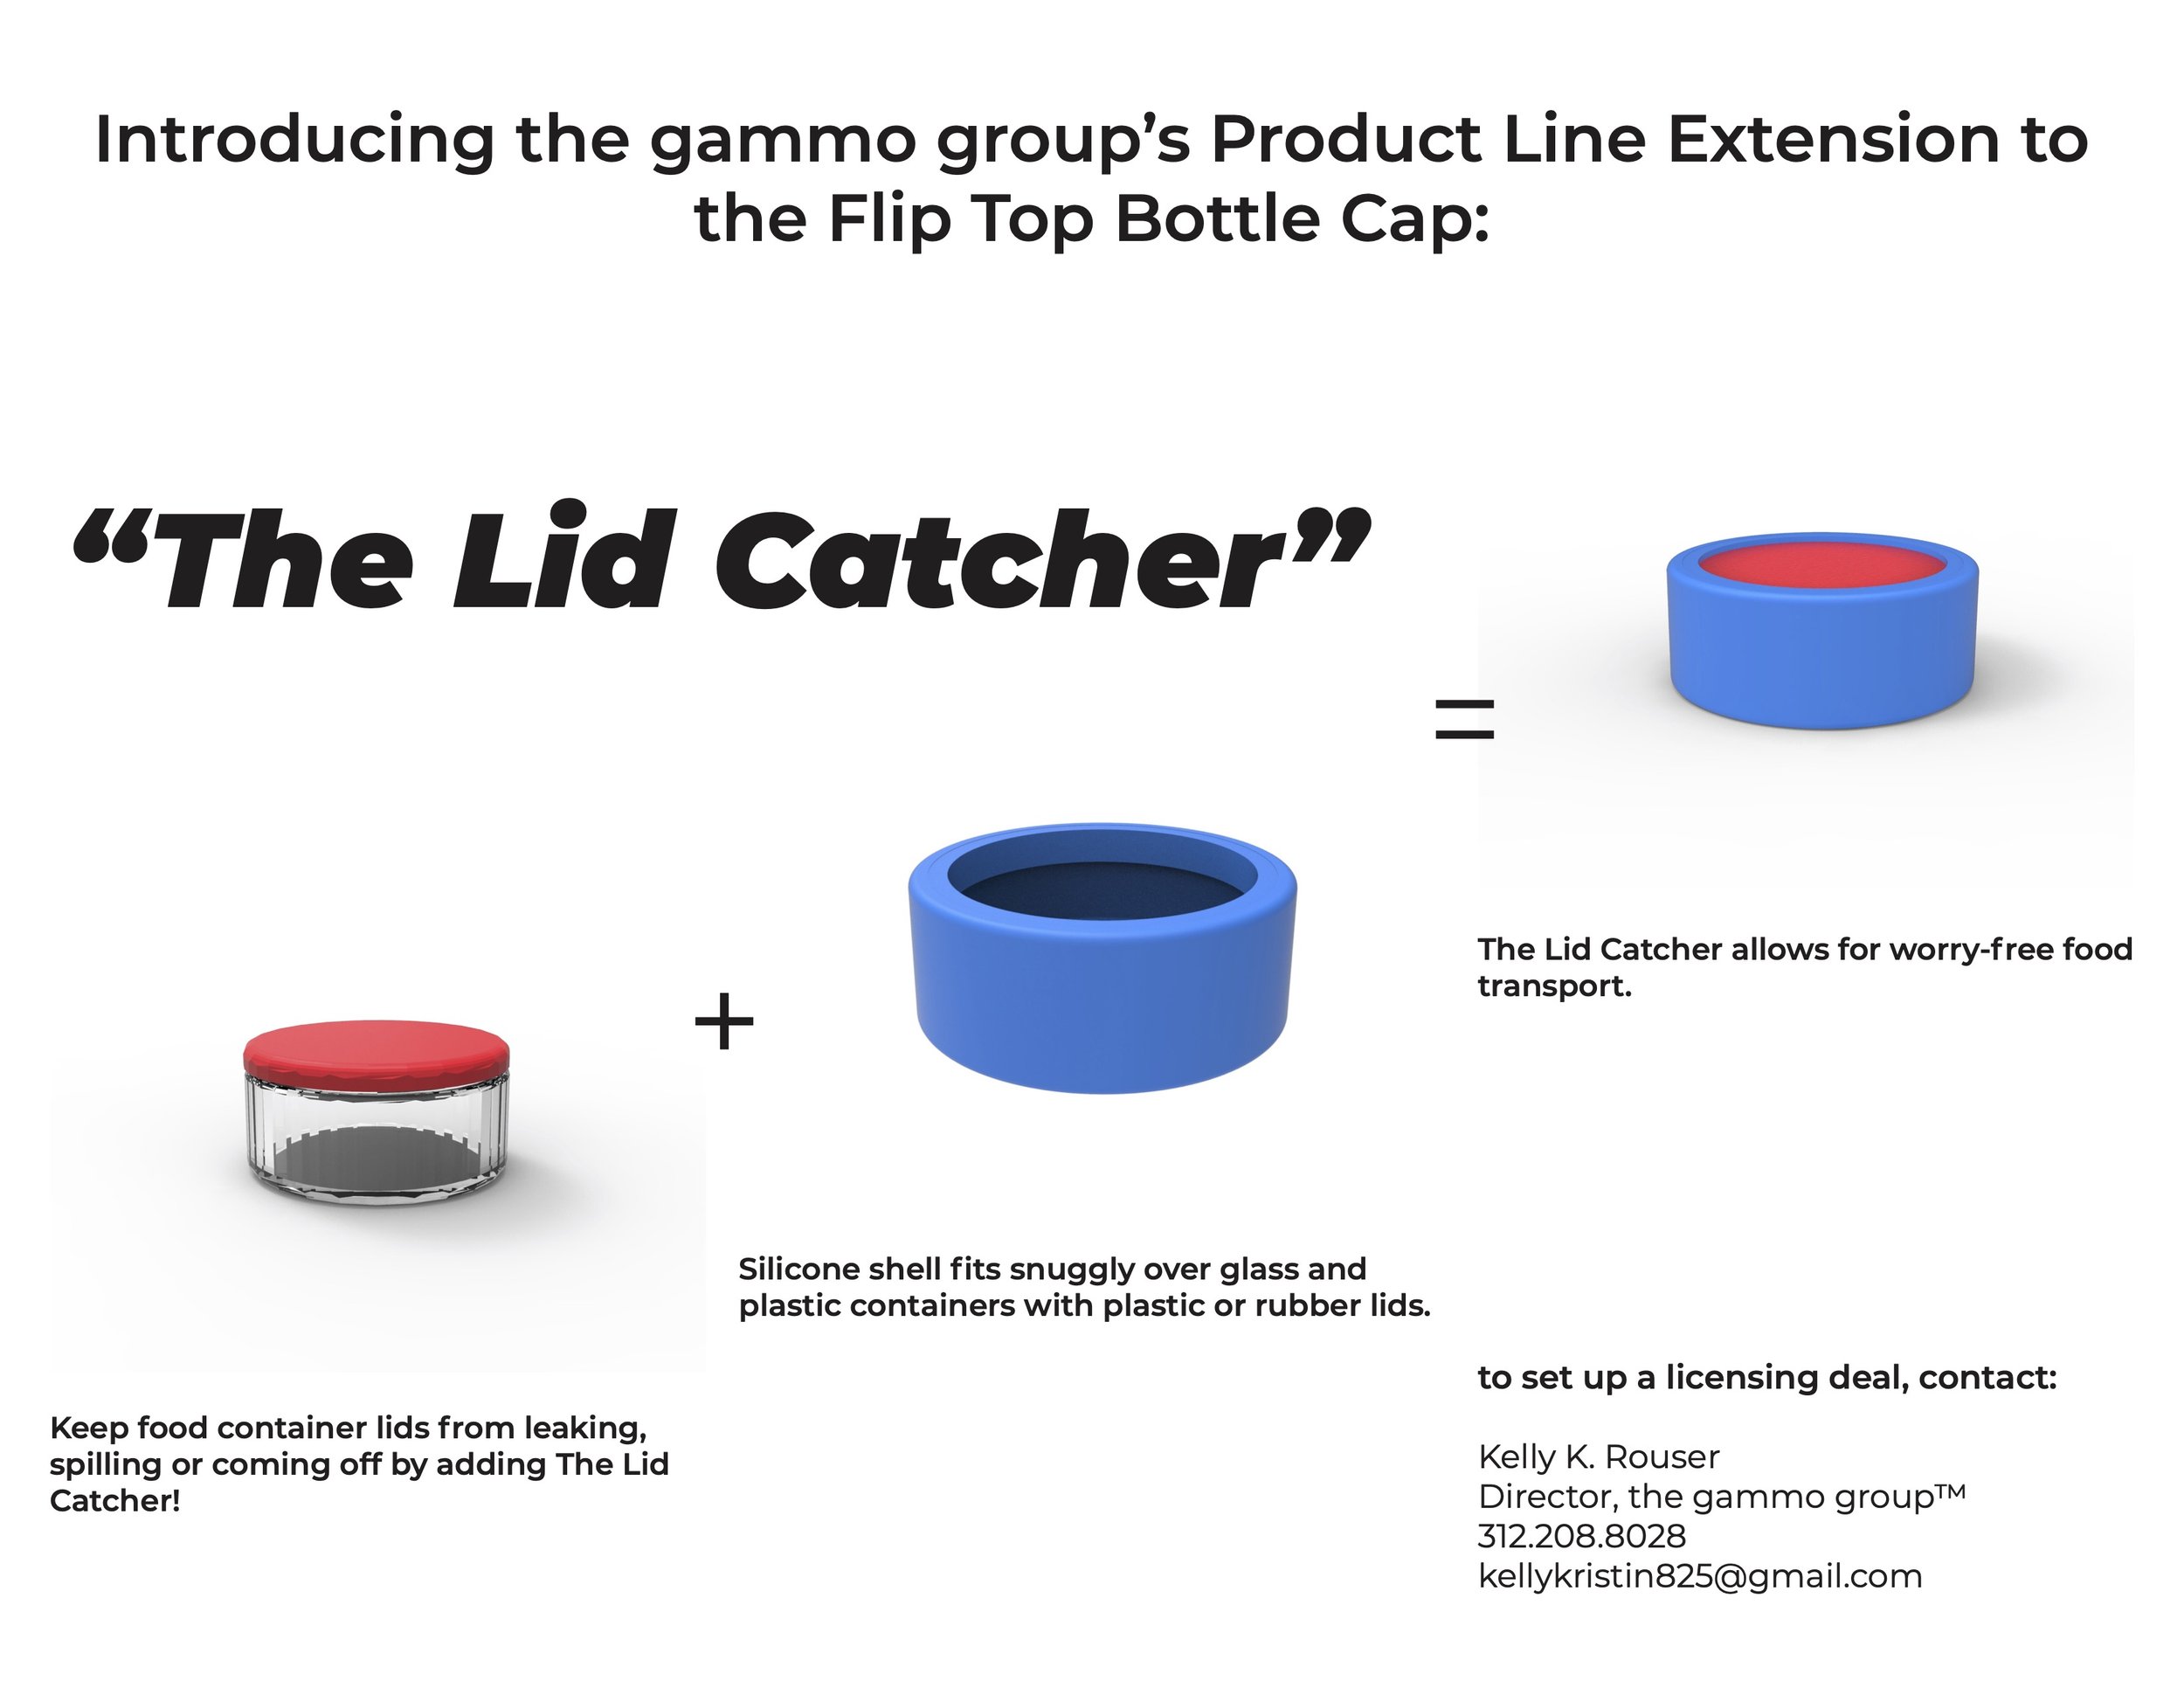 Sell Sheet for The Lid Catcher